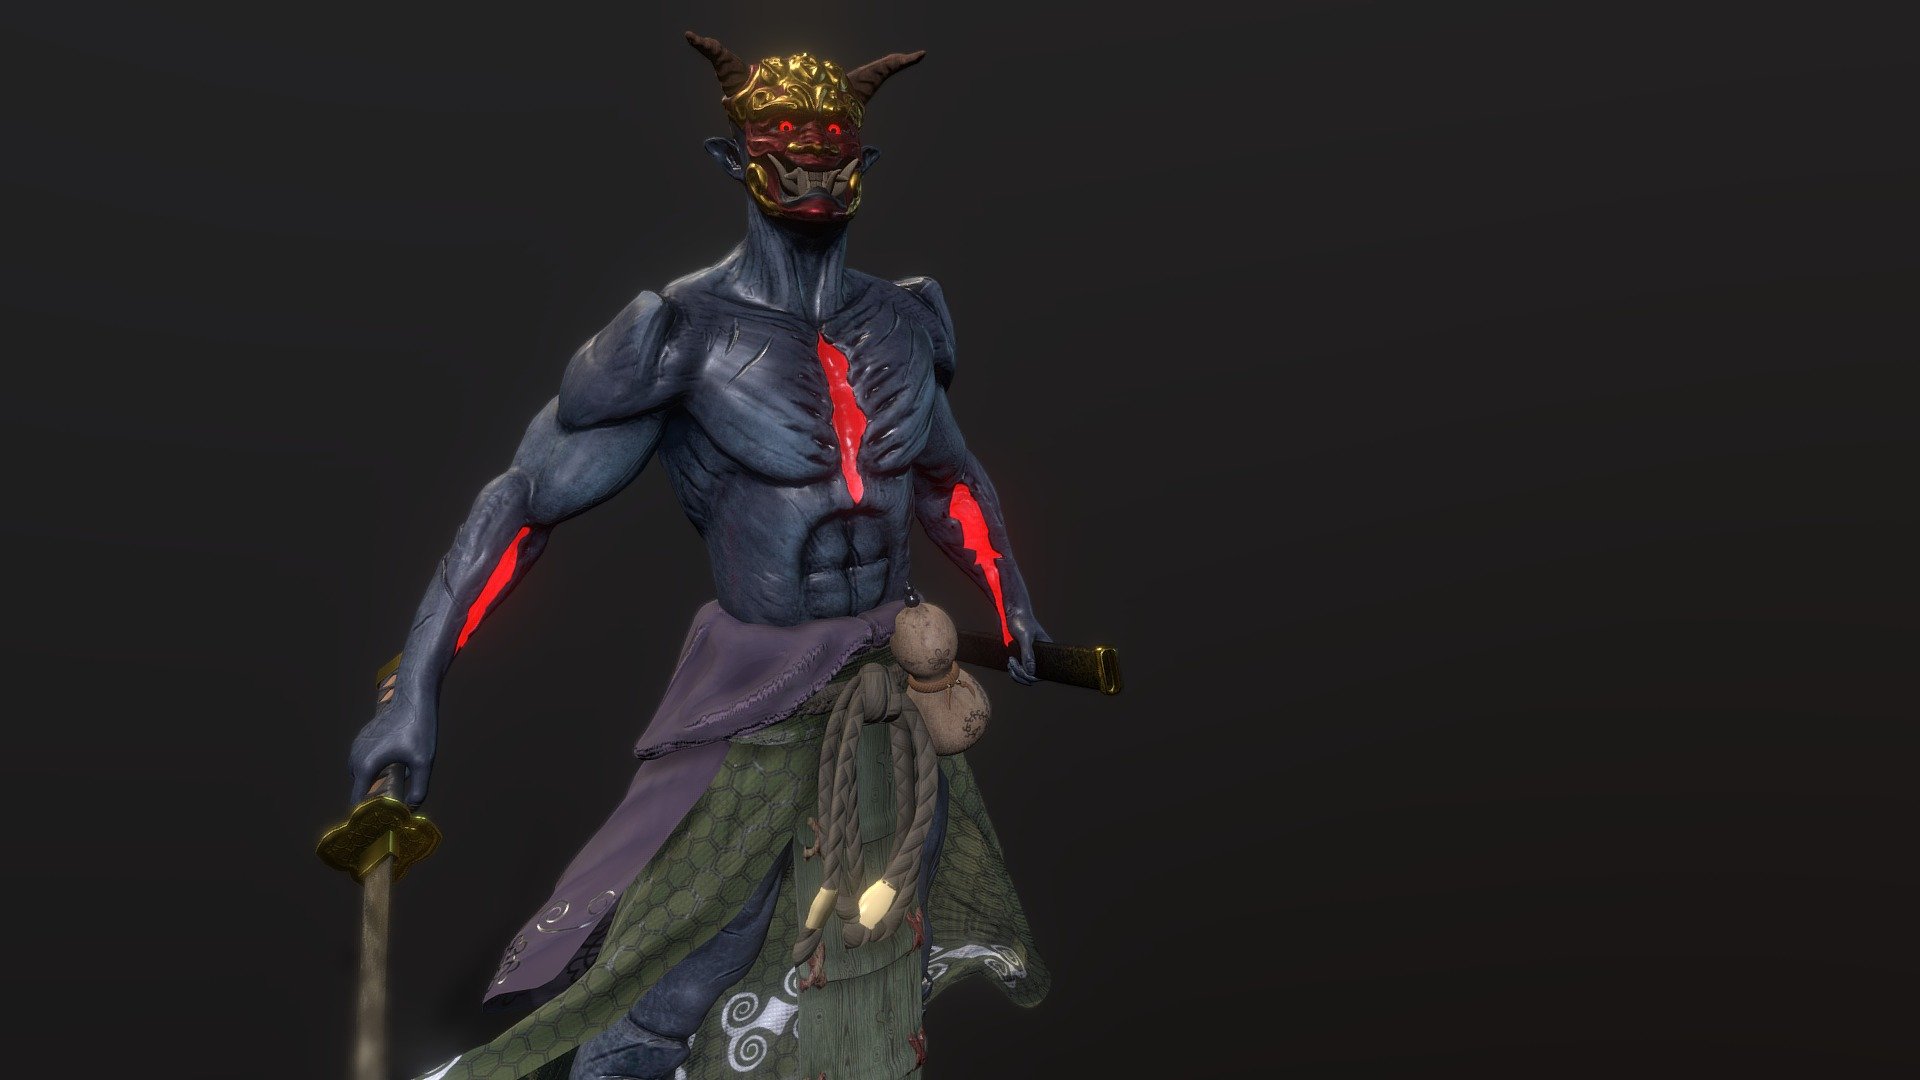 Here is a remake of an old model I made back in 2019. The character is an Oni character with a basic weapon. Rigged and is game ready. The sword and sheath arent weight painted, only parented to their control bones 3d model